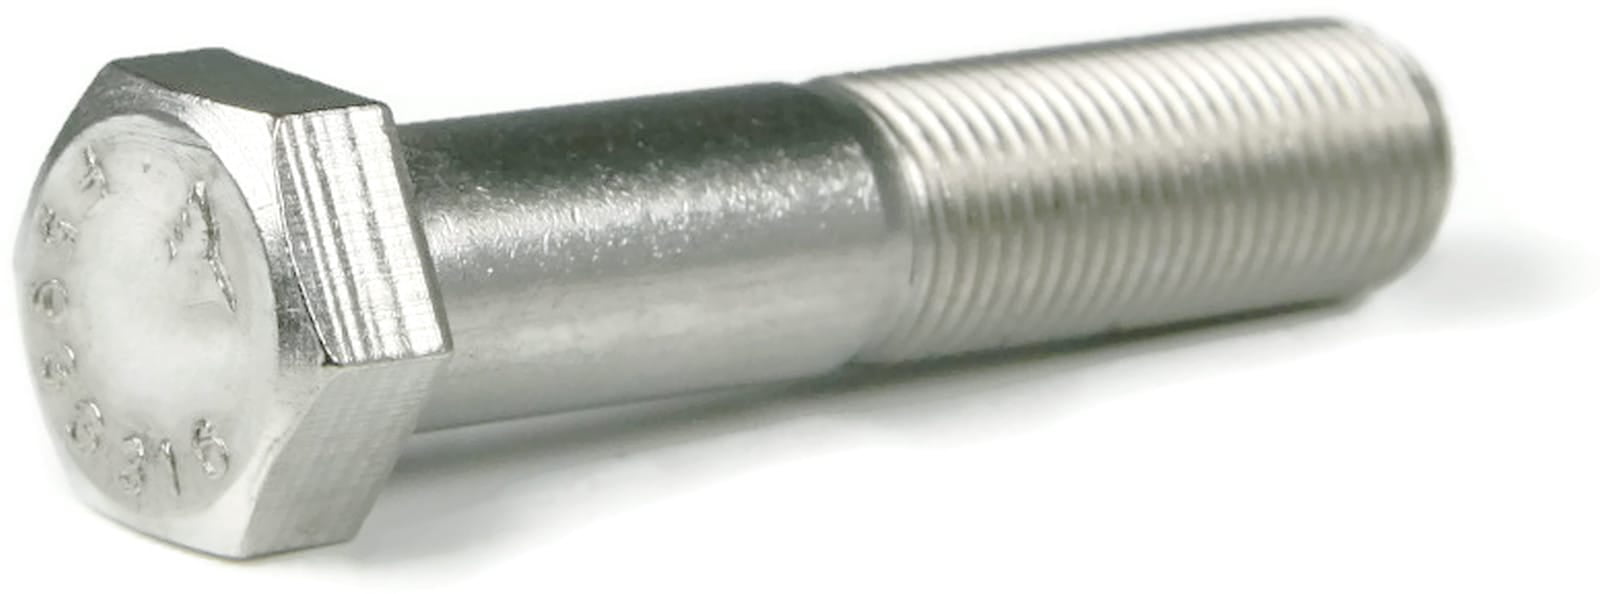 5/16-18 x 1/2 Hex Head Cap Screws, Stainless Steel 316, Plain Finish Quantity: 50 pcs) Coarse Thread UNC, Partially Threaded, Length: 1/2  Inch, Thread Size: 5/16 Inch